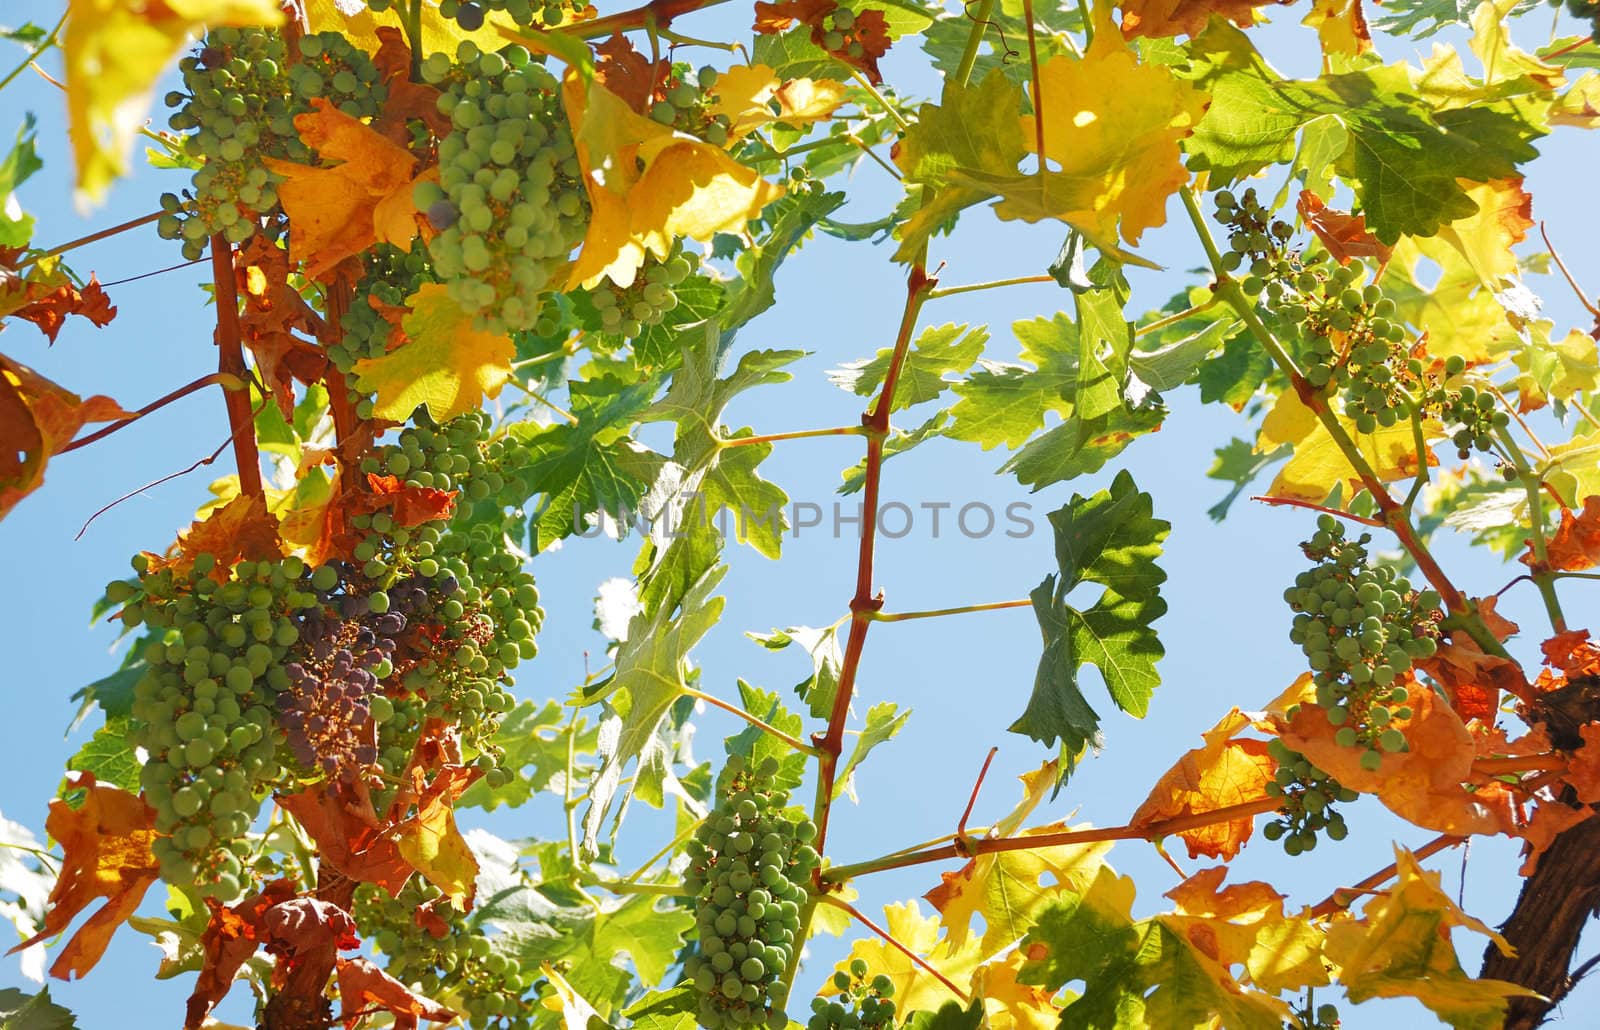 Grapes Against the Sky by goldenangel